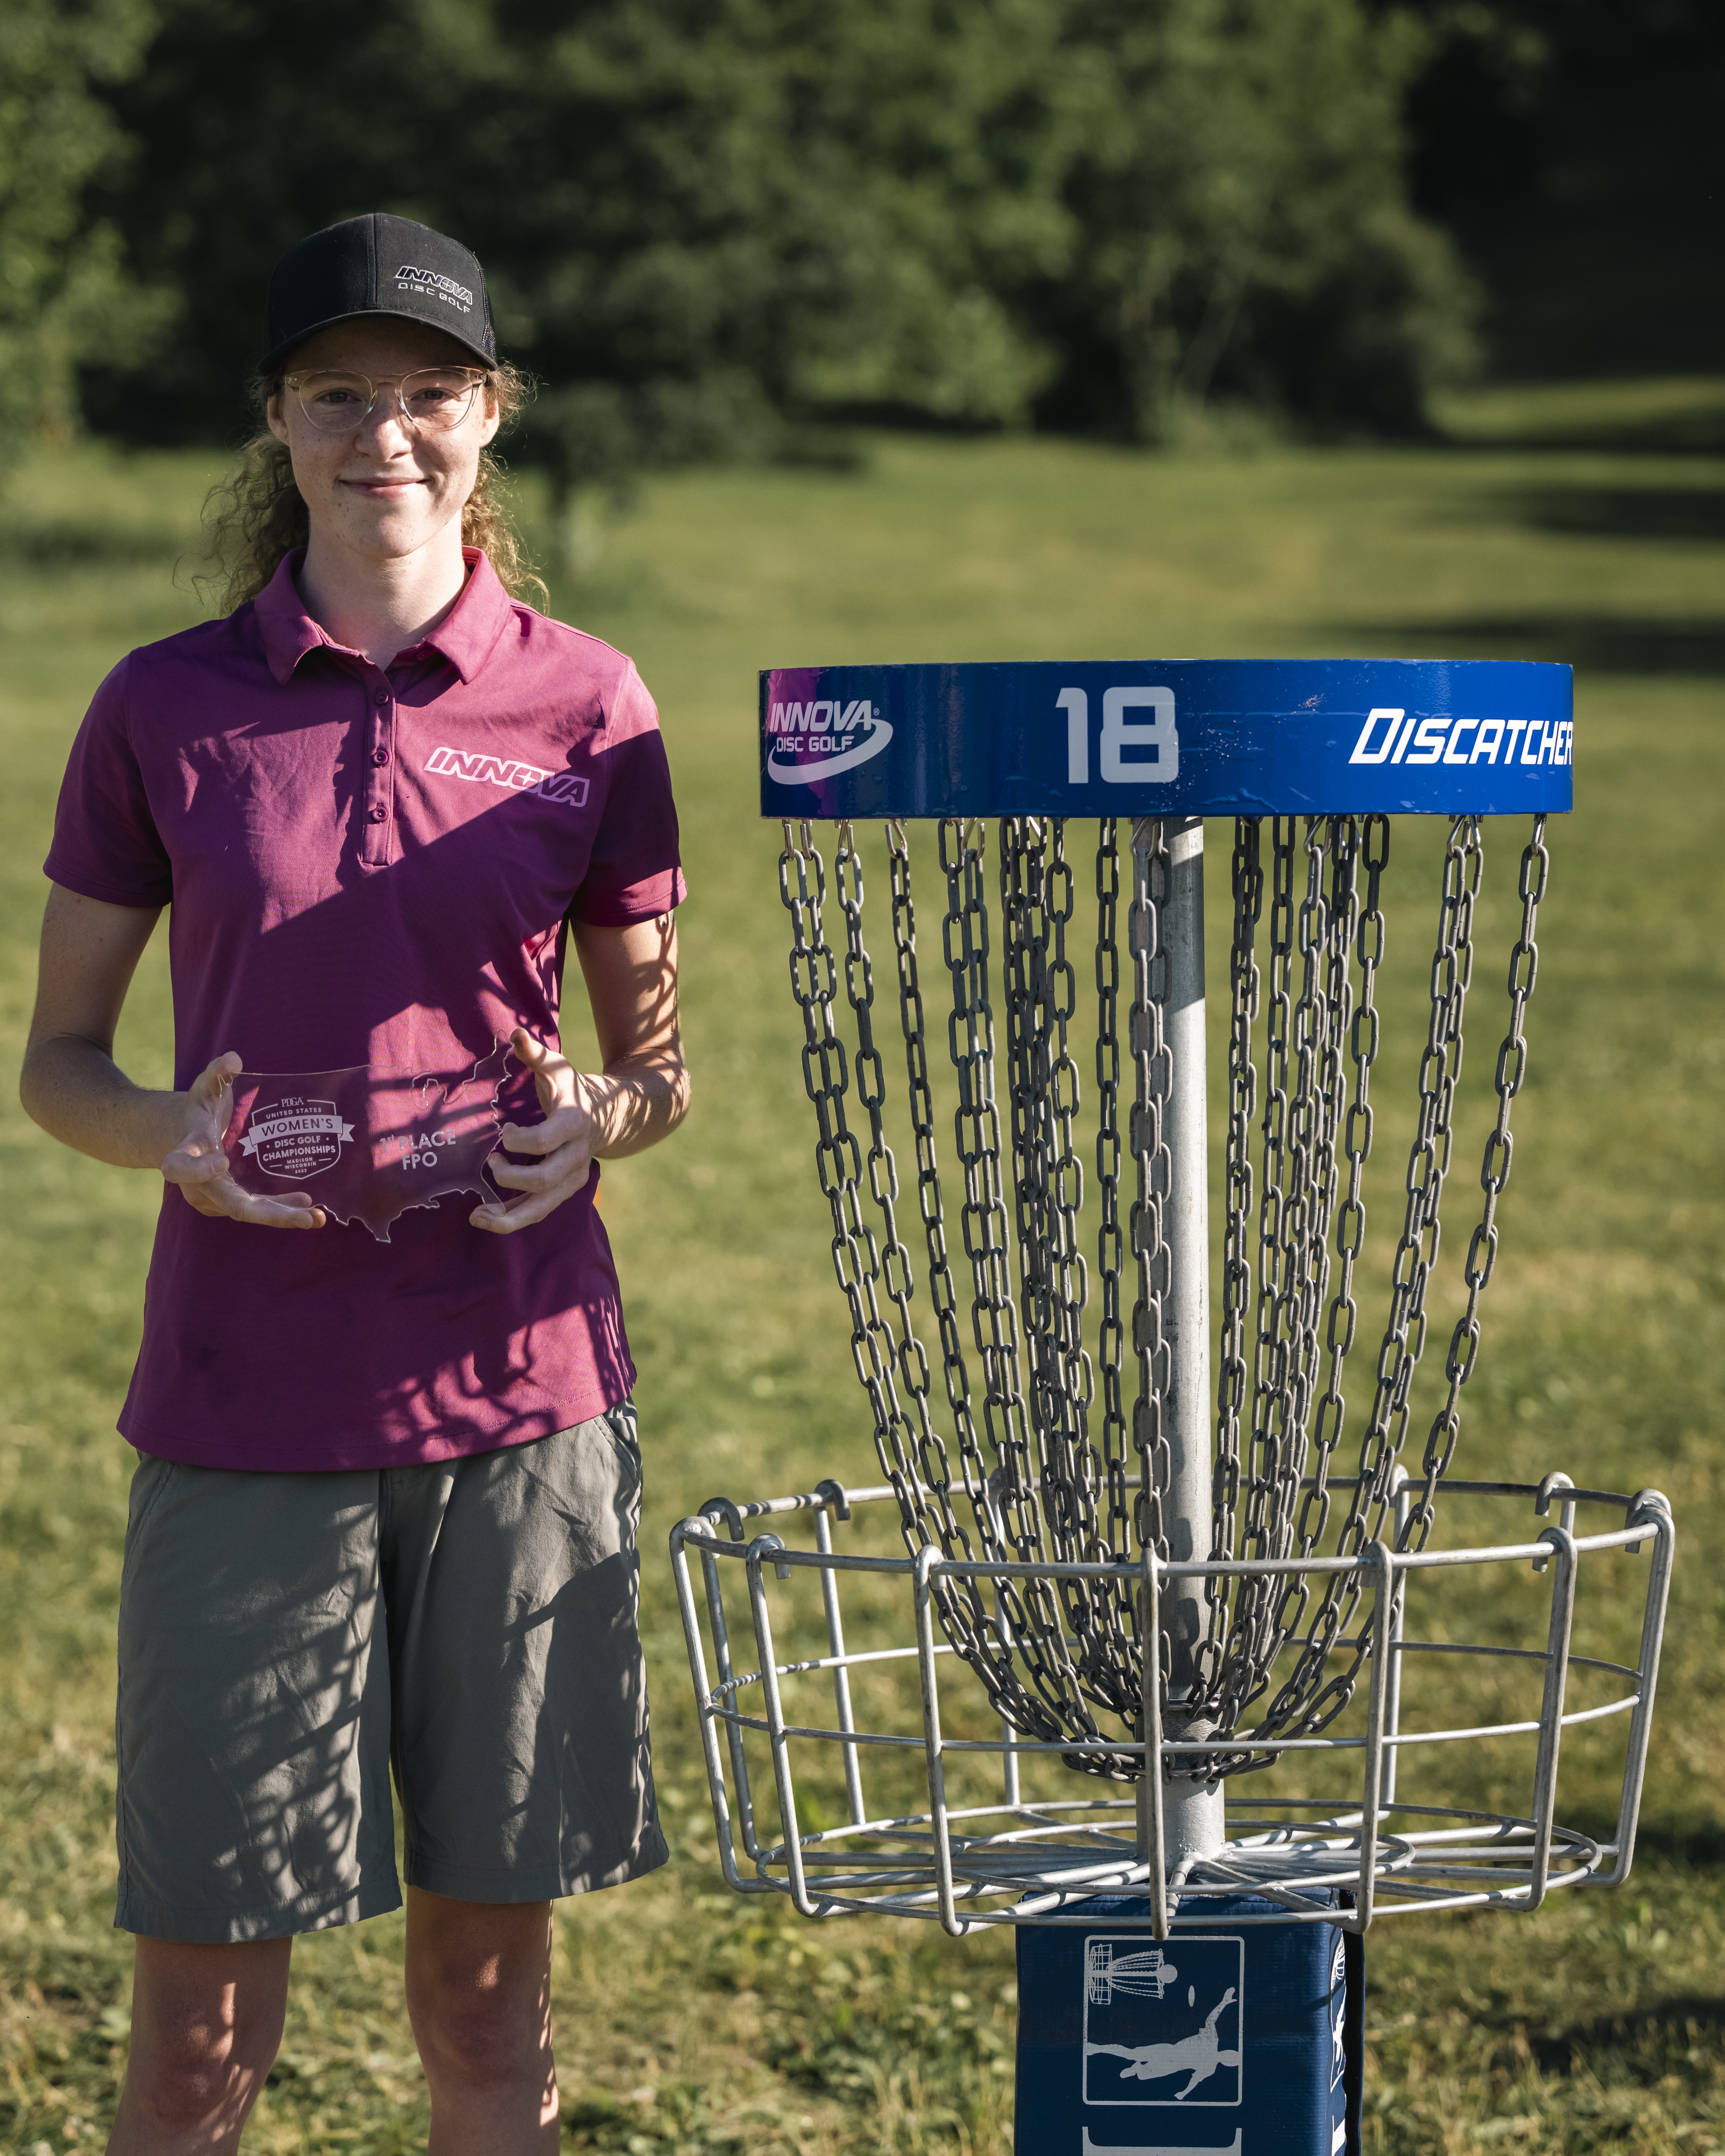 Homecoming for King Leads Thrilling USWDGC Professional Disc Golf Association photo